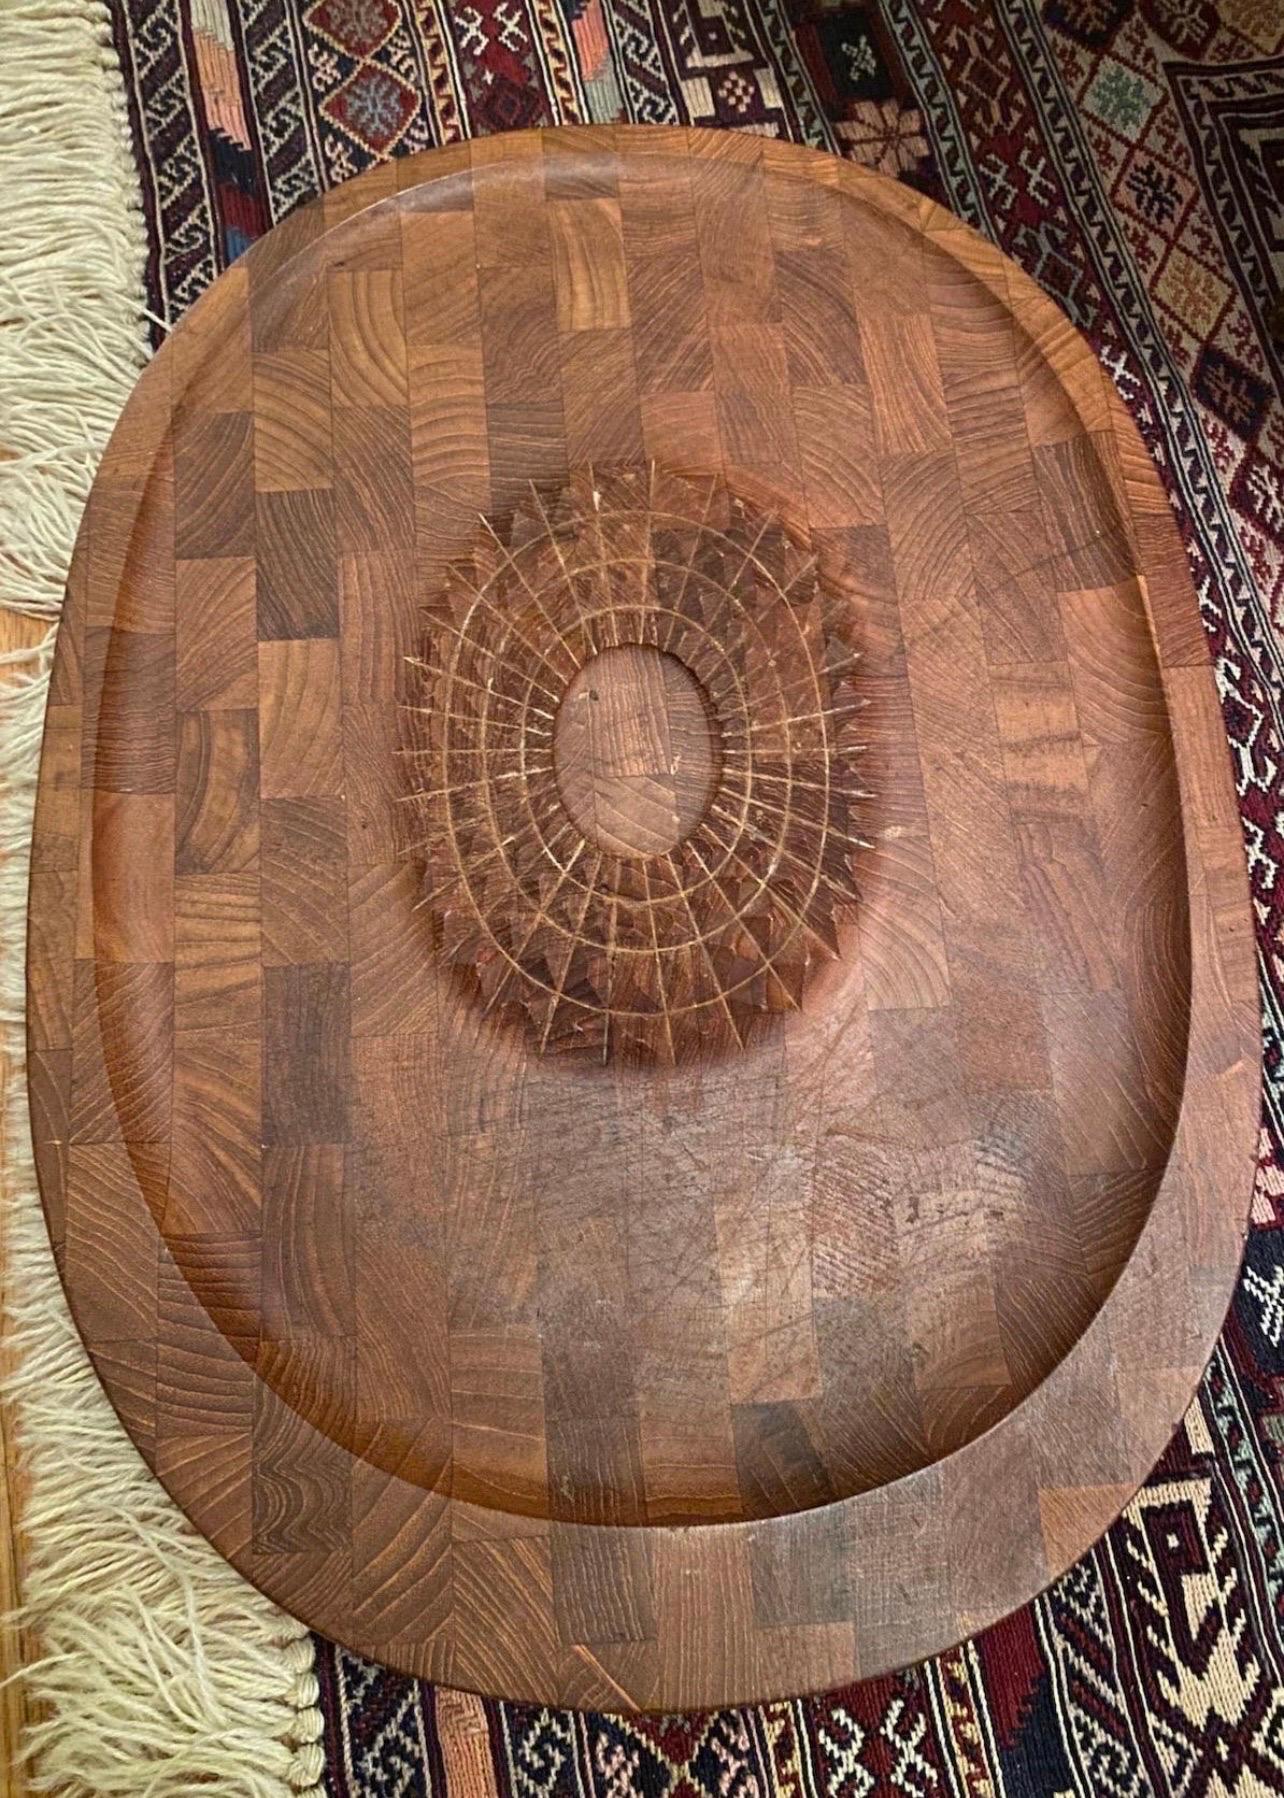 Beautiful and rare vintage 1960's Danish modern teak cutting board. Made by Digsmed, Denmark. Marked: 'Digsmed Denmark 411'. Super high quality and decorative item! This is part of my personal collection and I had it hanging on one of my many